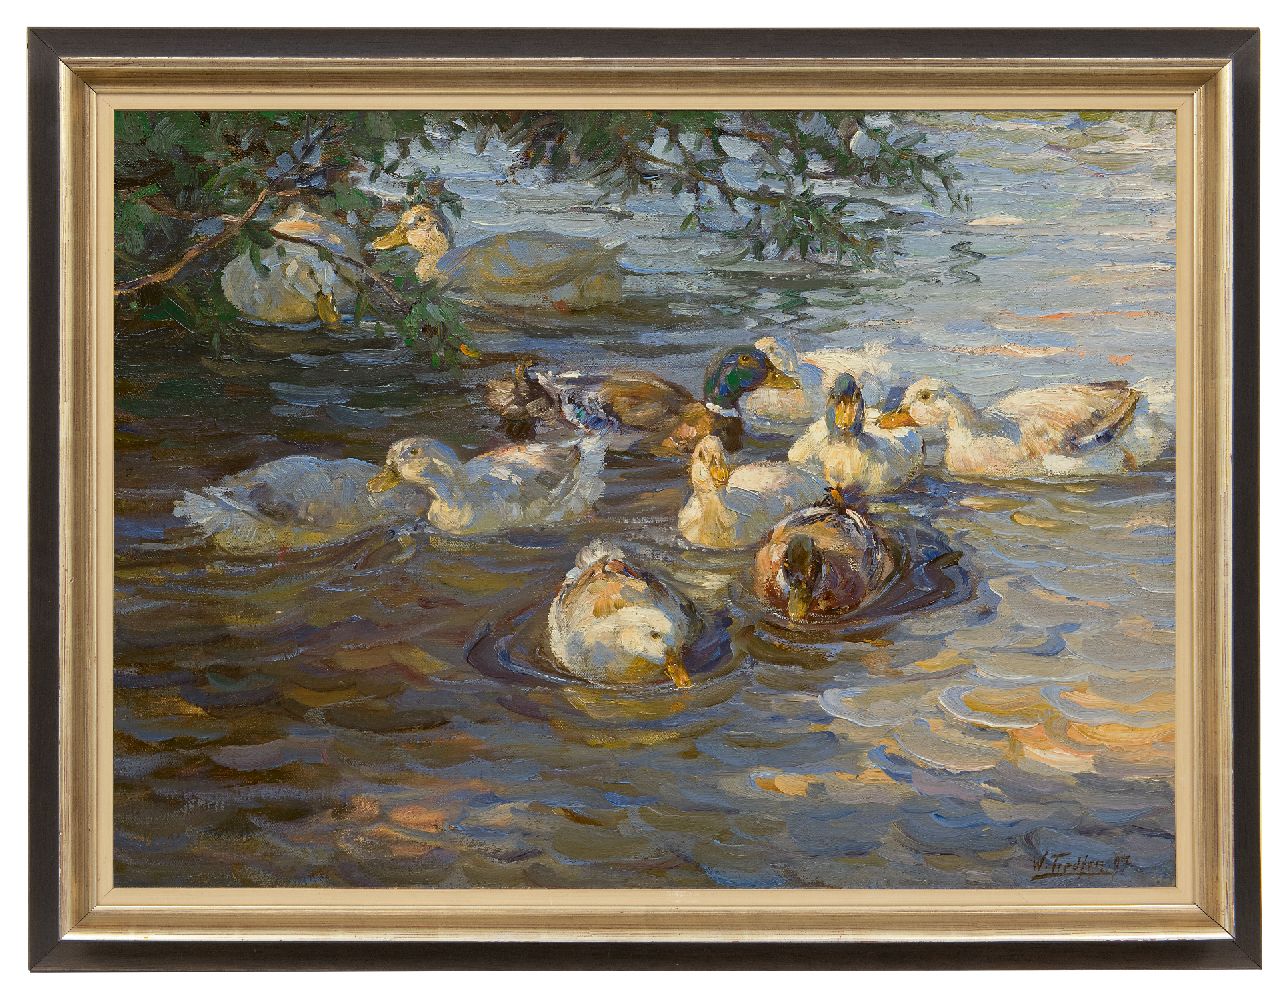 Tiedjen C.F.M.W.  | Carl Friedrich Martin Wilhelm 'Willy' Tiedjen | Paintings offered for sale | Ducks in a pond, oil on canvas 60.0 x 80.0 cm, signed l.r. and dated '07